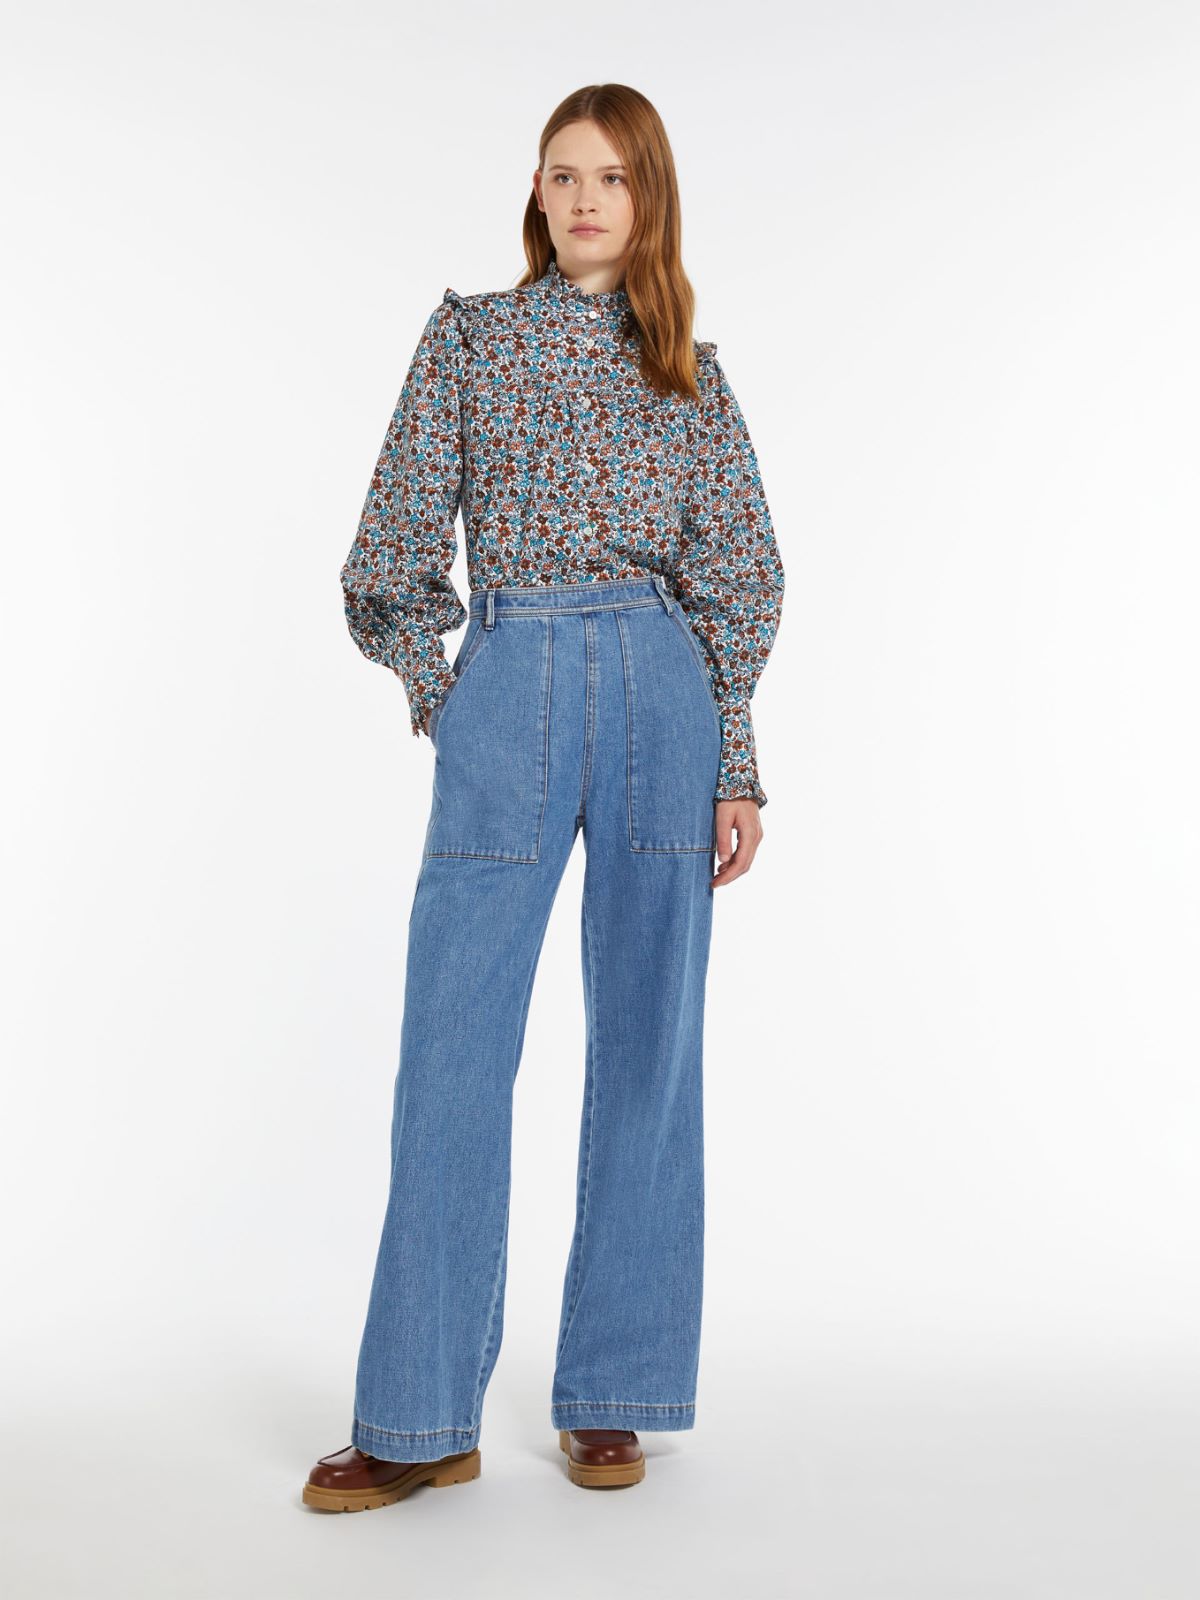 Printed twill shirt with ruches - WHITE - Weekend Max Mara